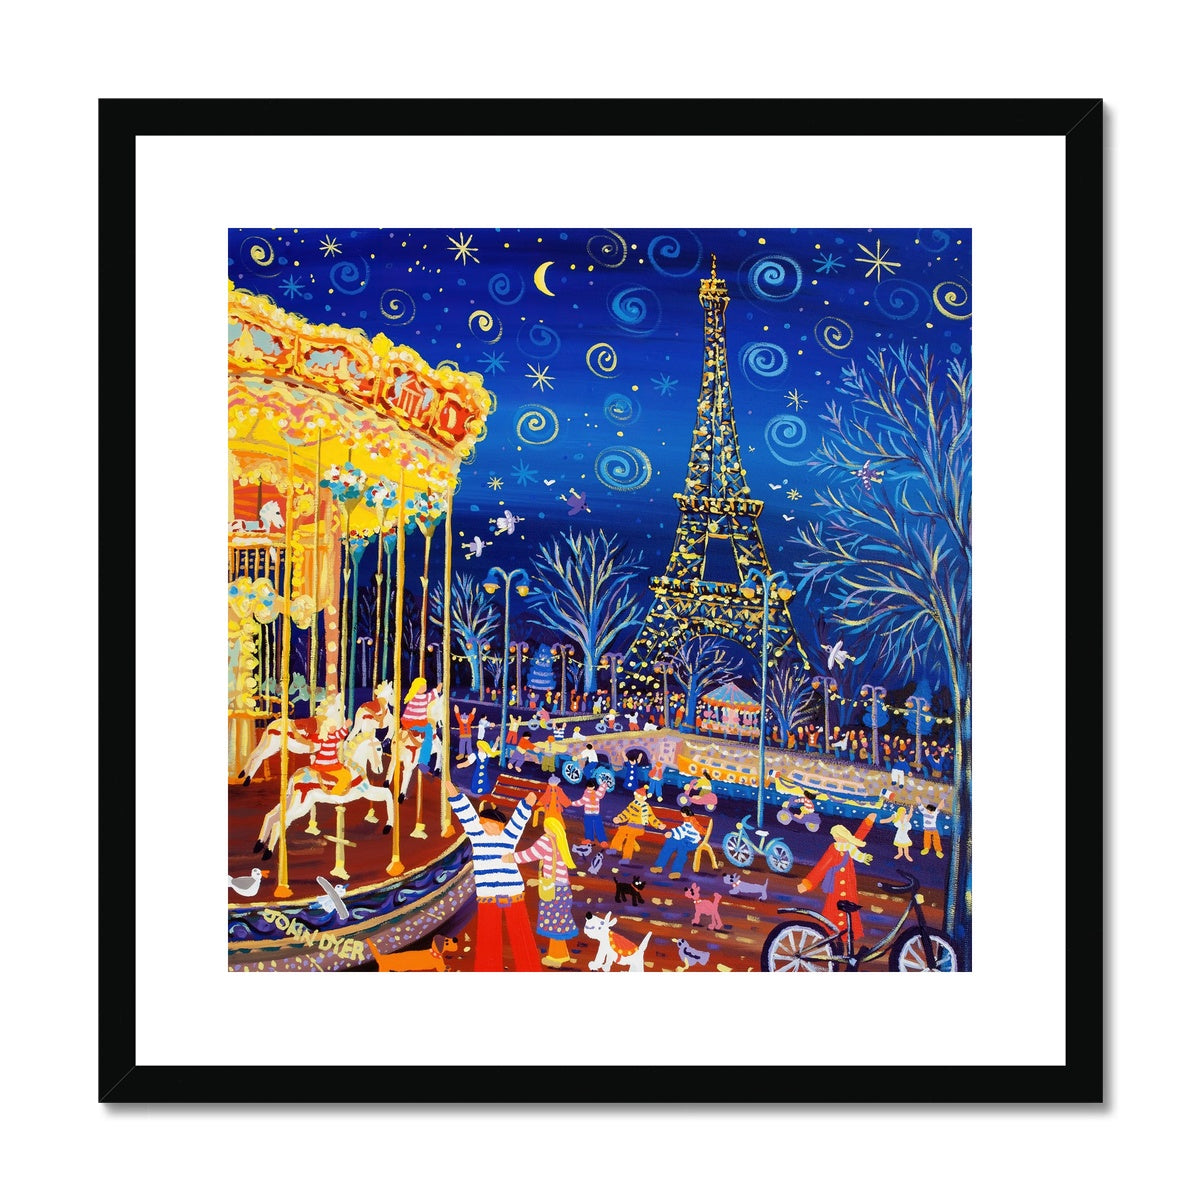 John Dyer Framed Open Edition French Art Print 'Twinkling Lights and Carousel Delights, Paris, Eiffel Tower' French Art Gallery